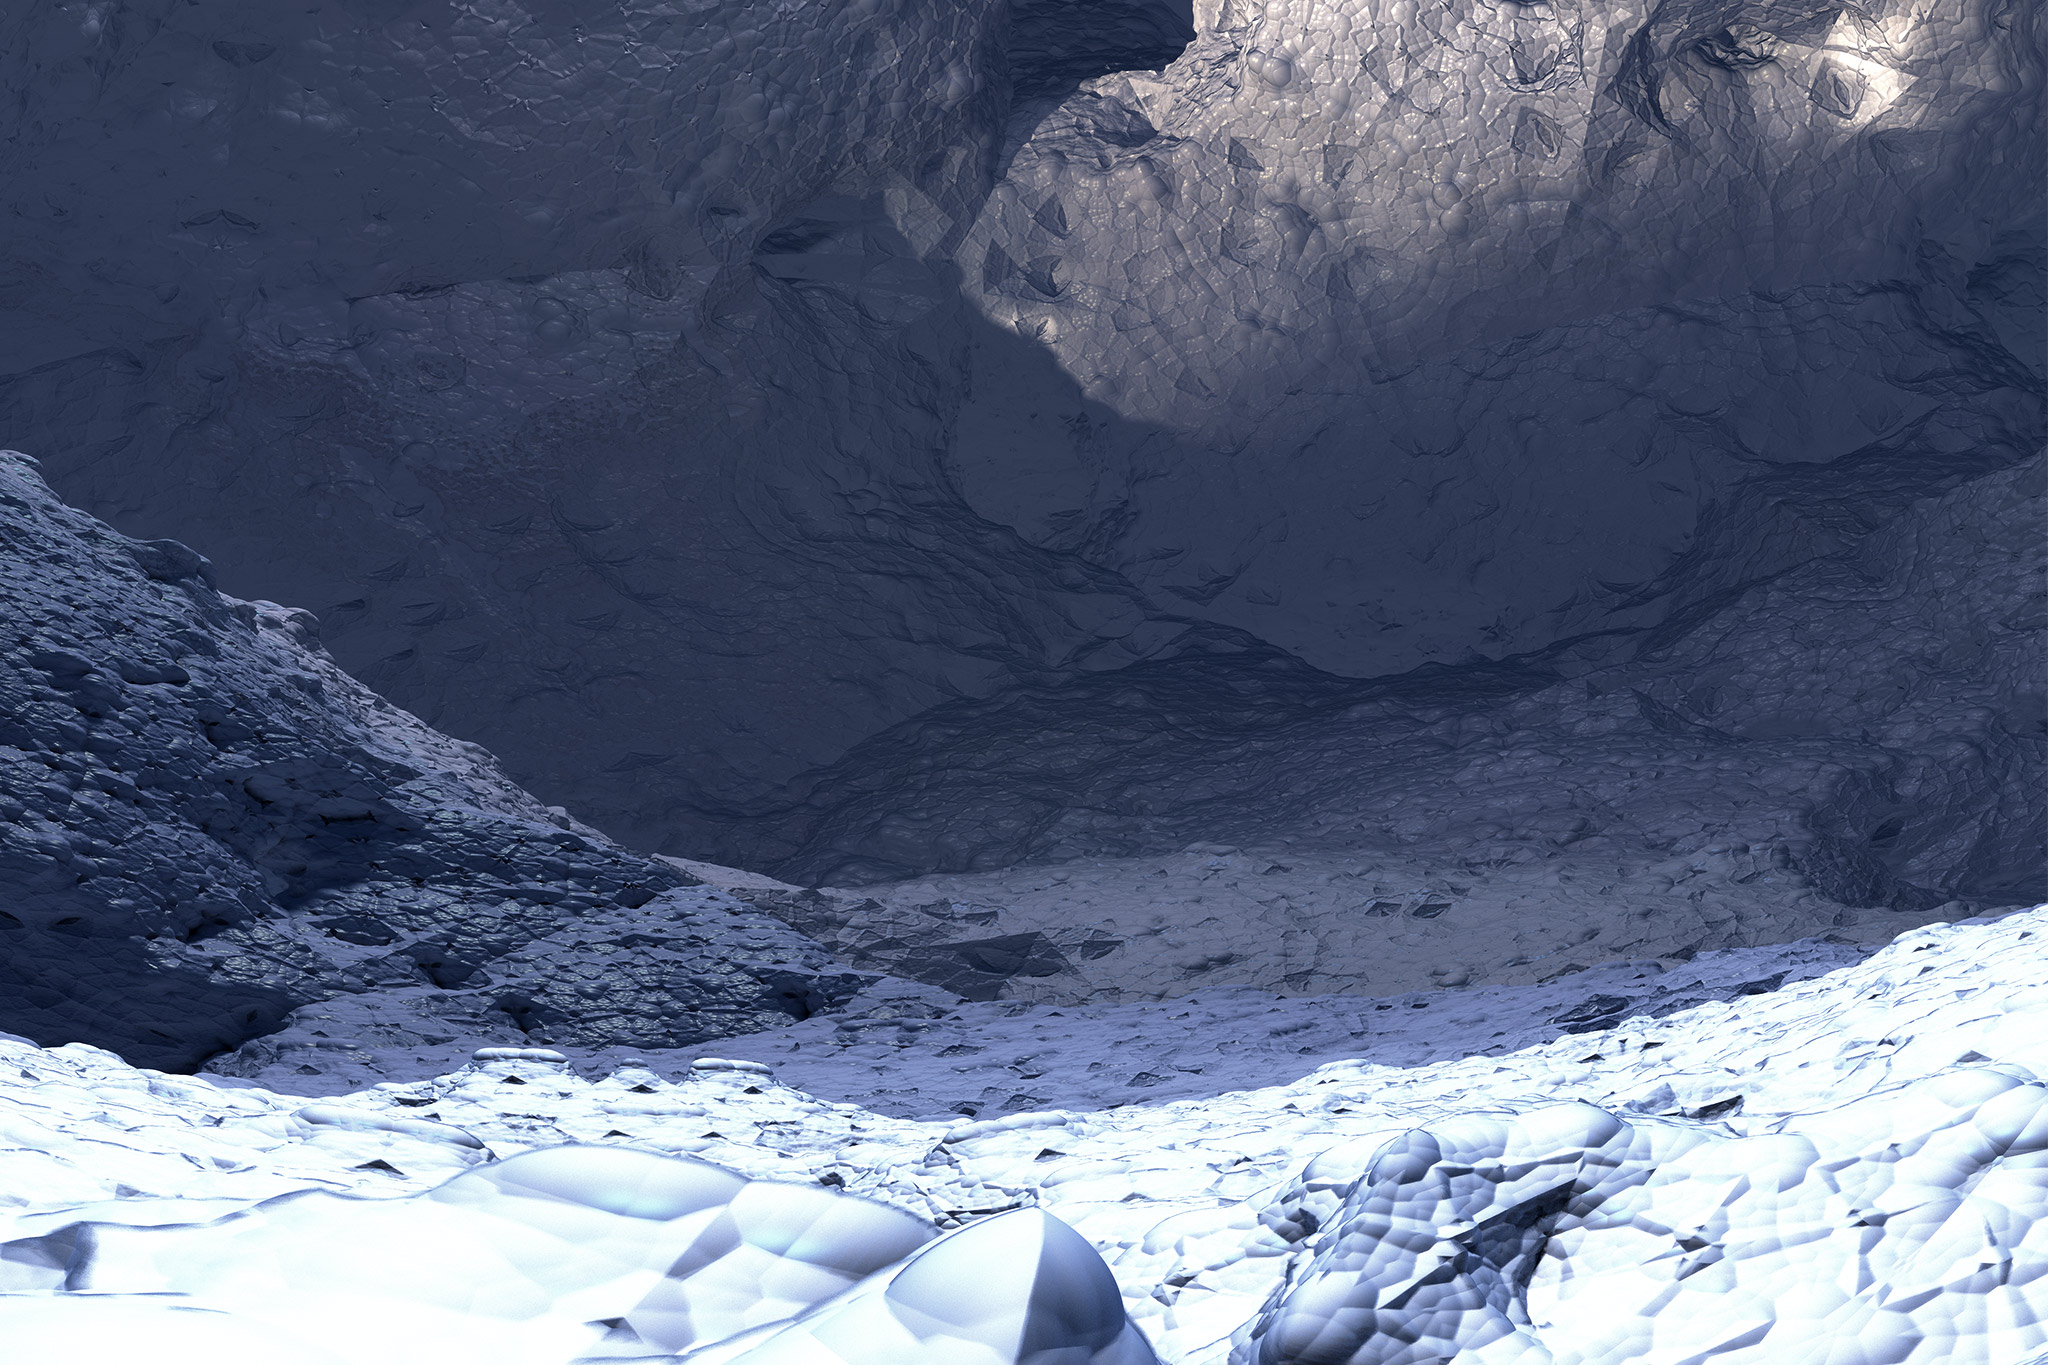 A cave with snow in the foreground composed of spherical geometry